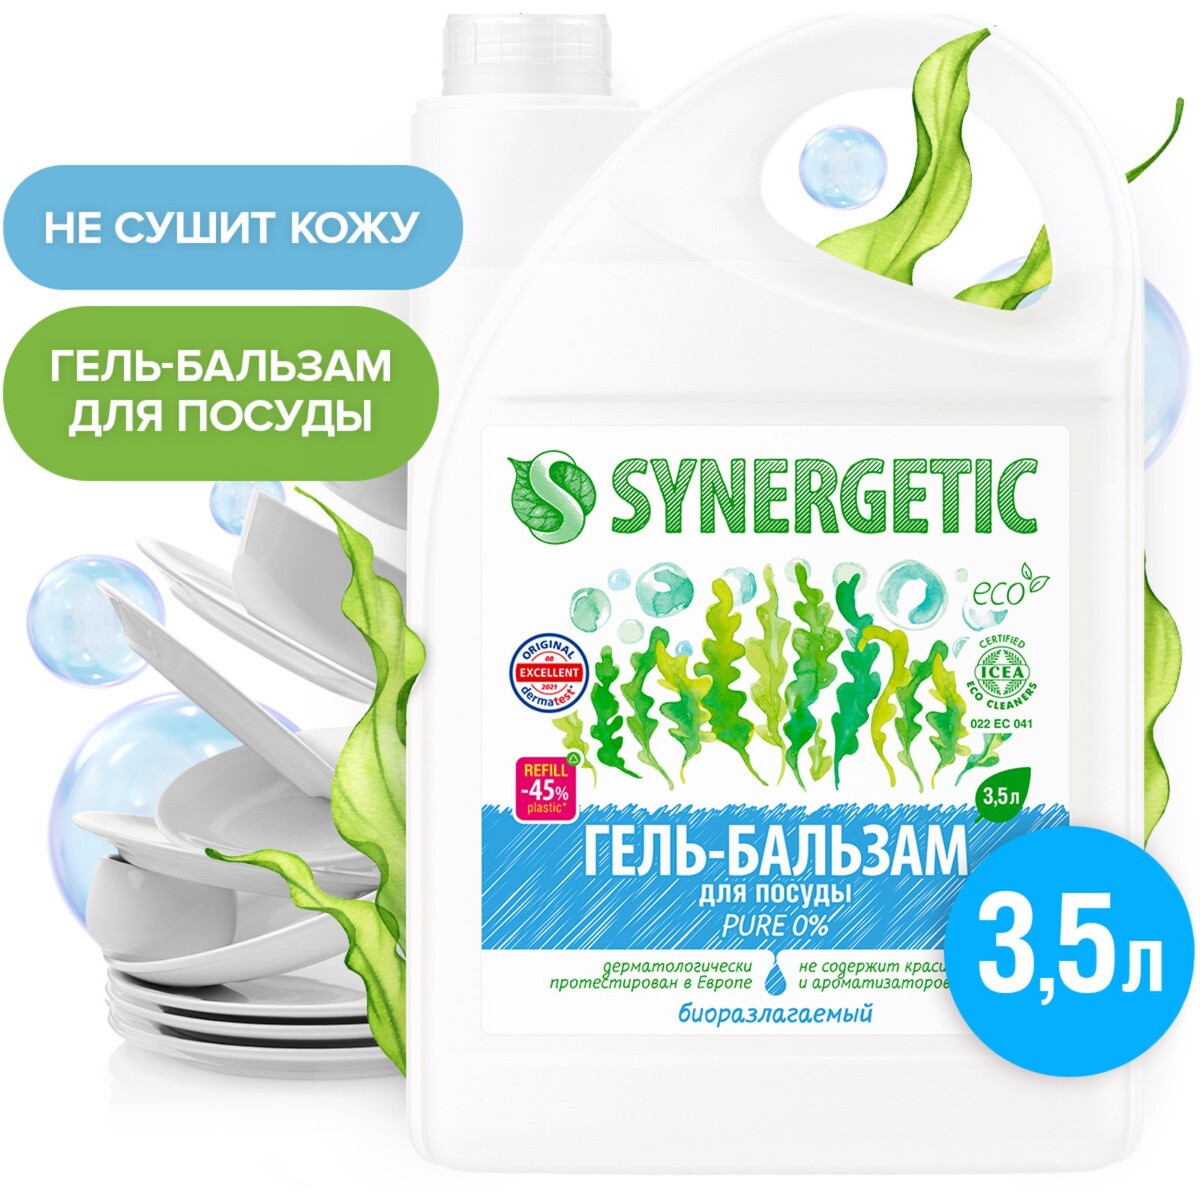 -       synergetic pure 0%, , 3, 5